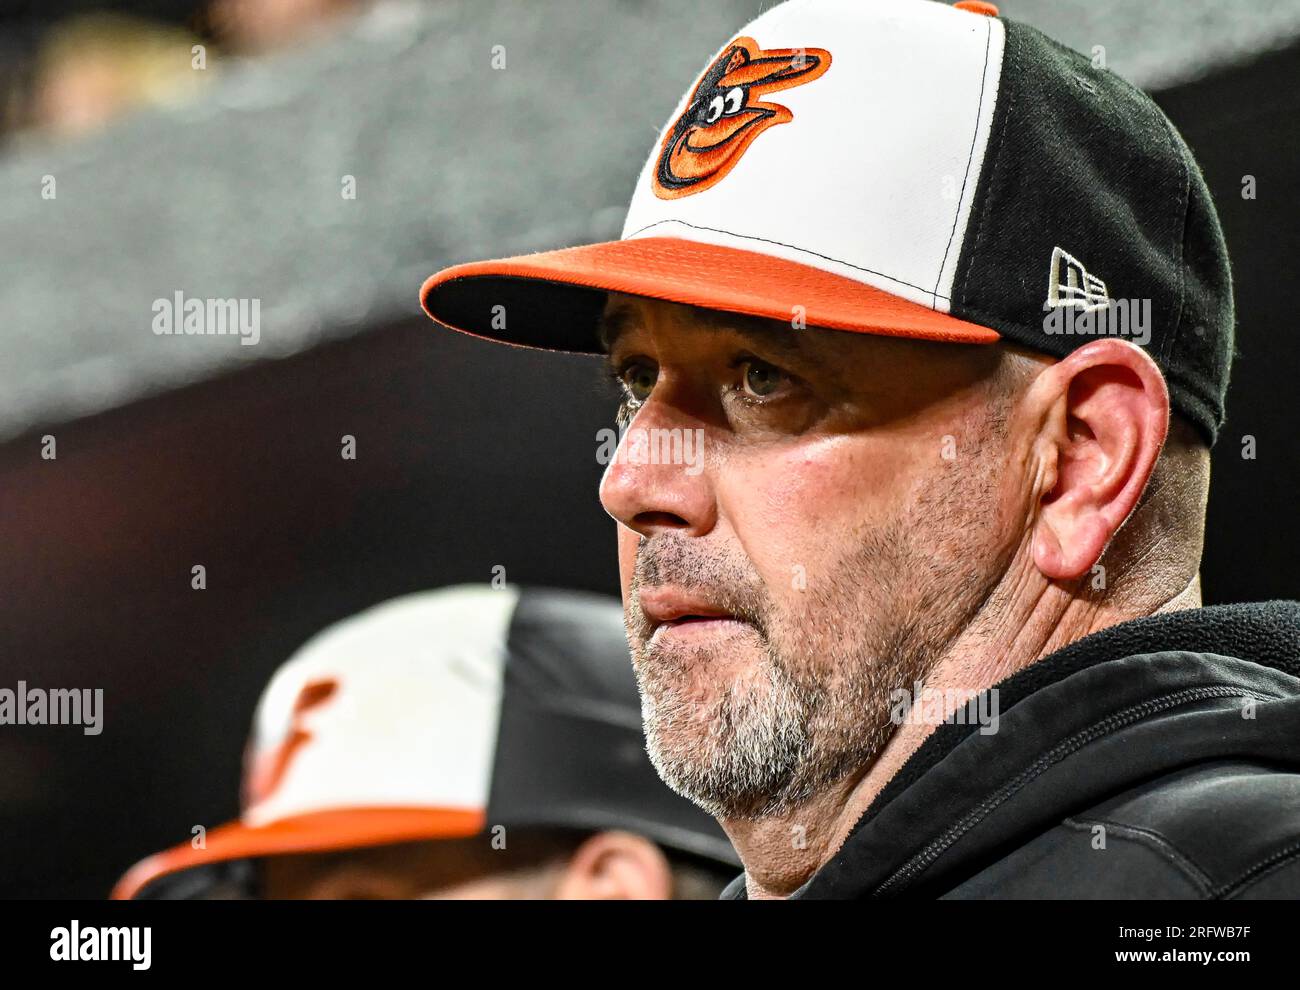 BALTIMORE, MD - August 5: Baltimore Orioles manager Brandon Hyde